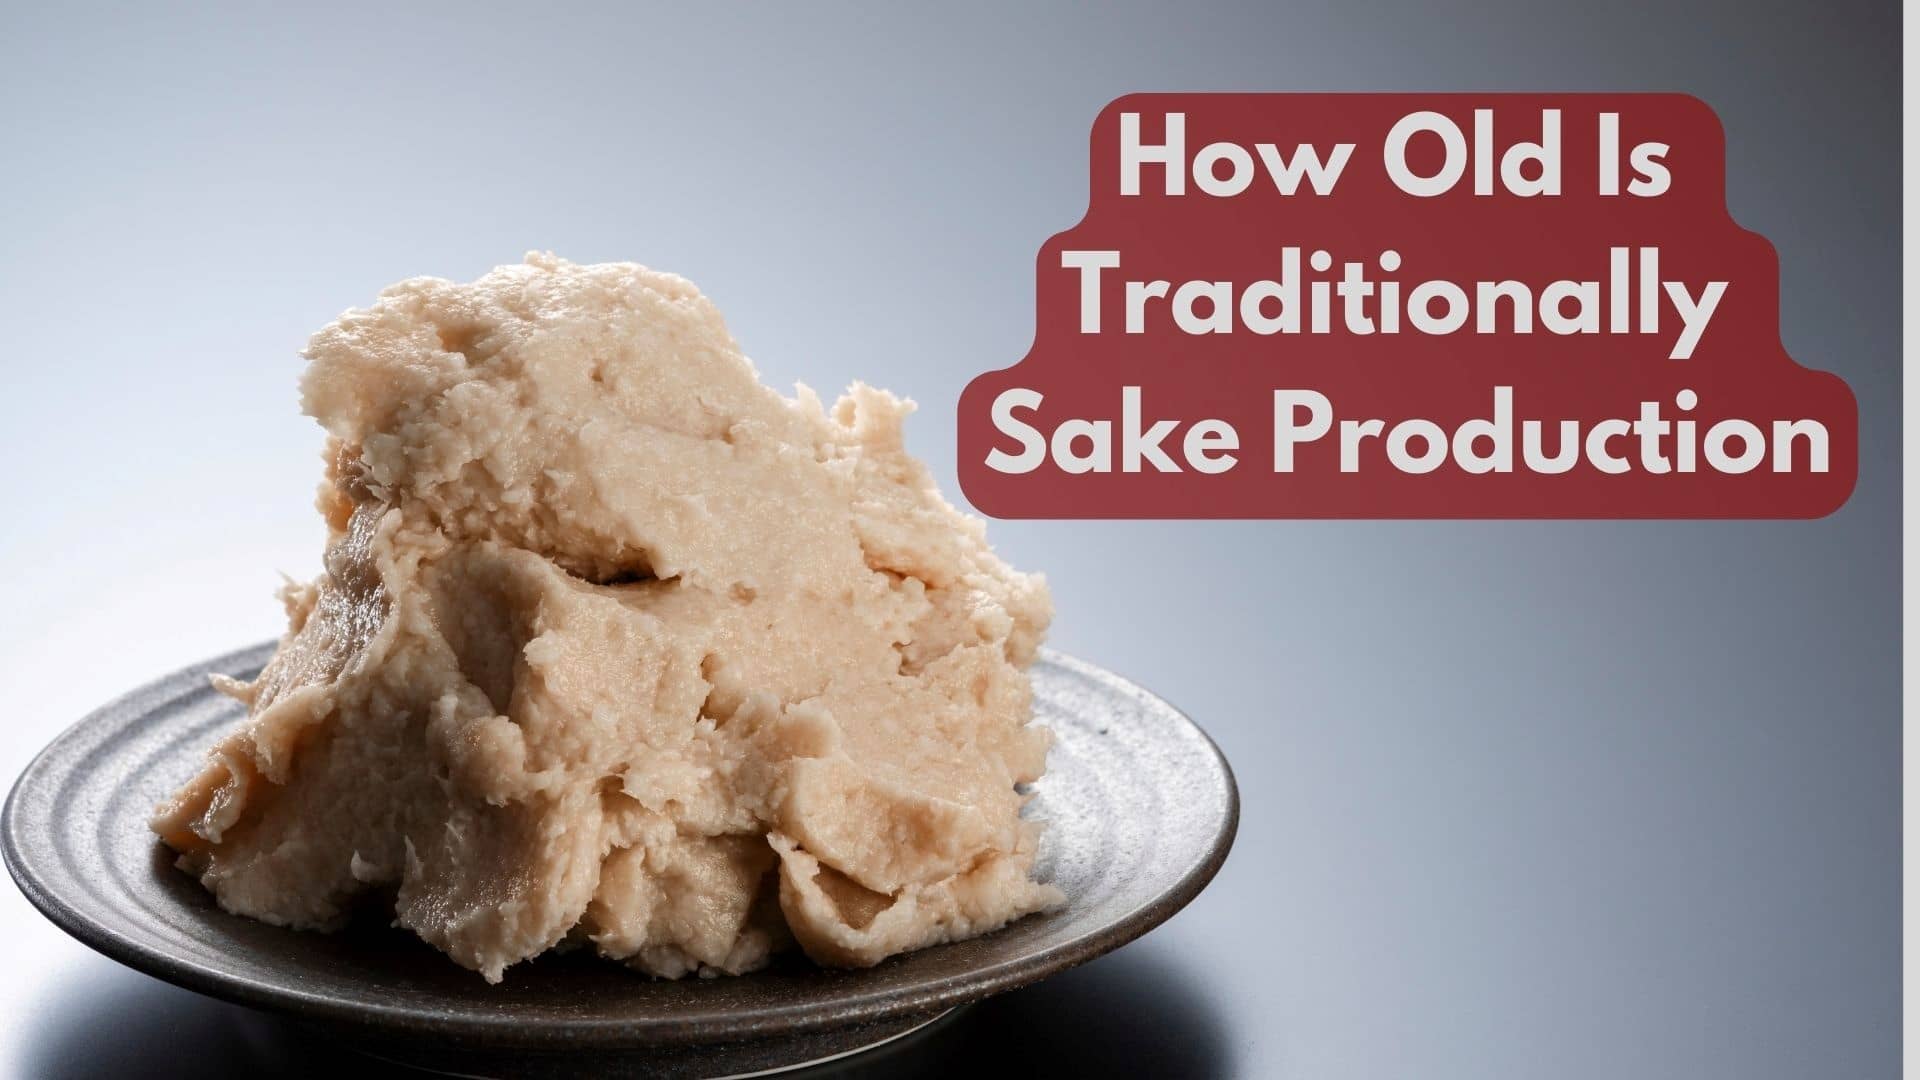 How Old Is Traditionally Sake Production?